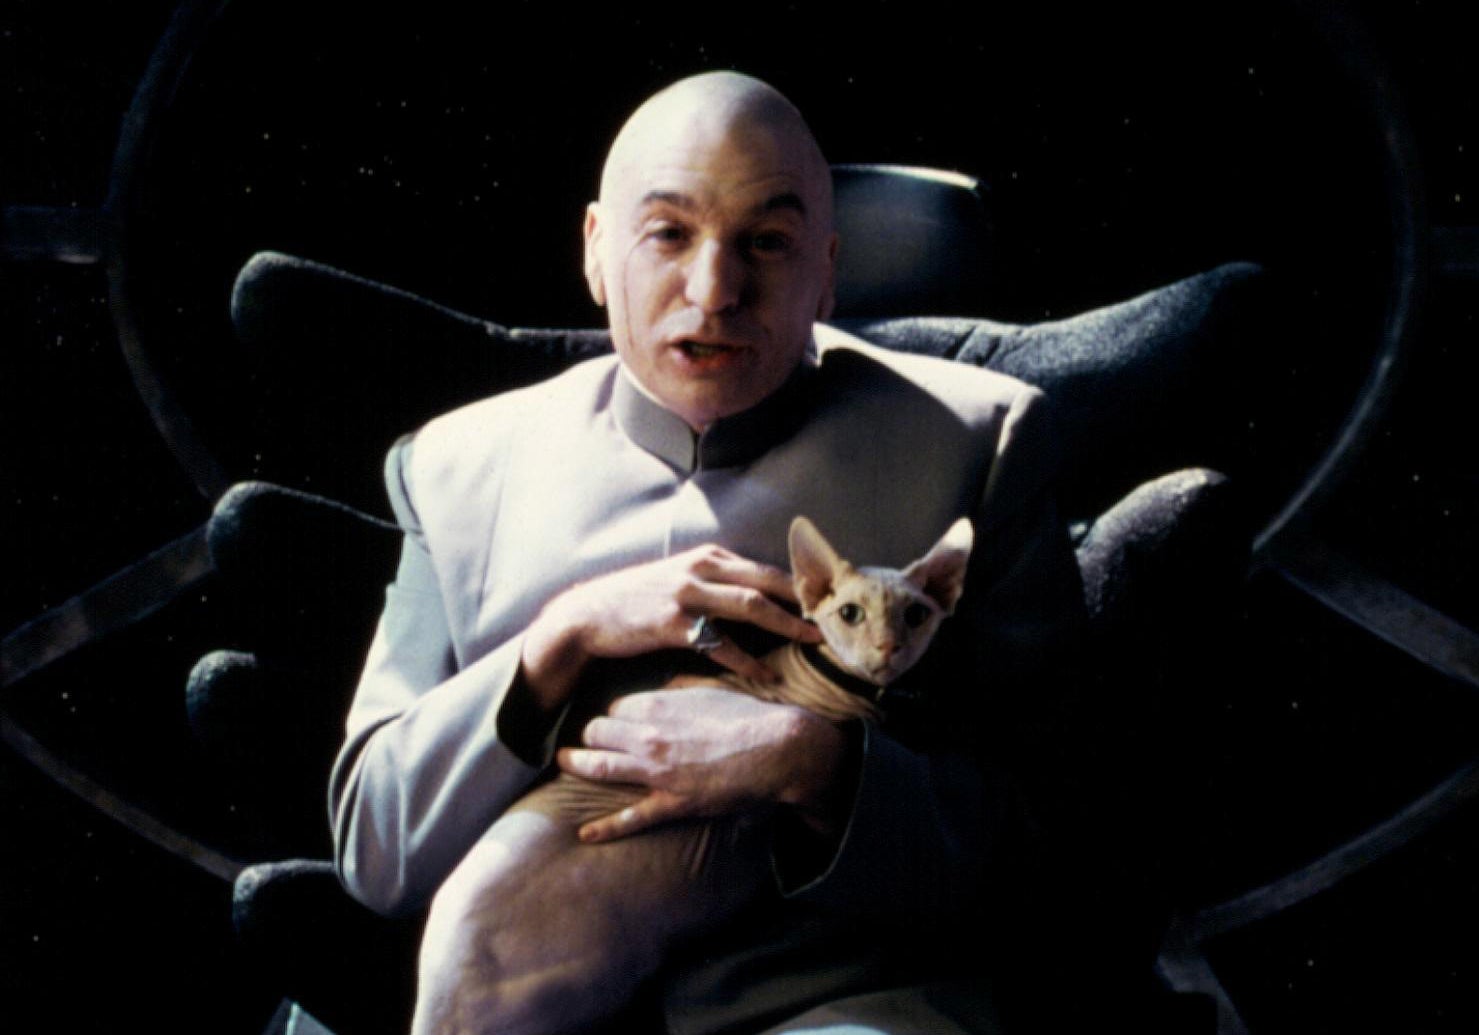 Mike Myers as Dr. Evil in Austin Powers holding a hairless cat